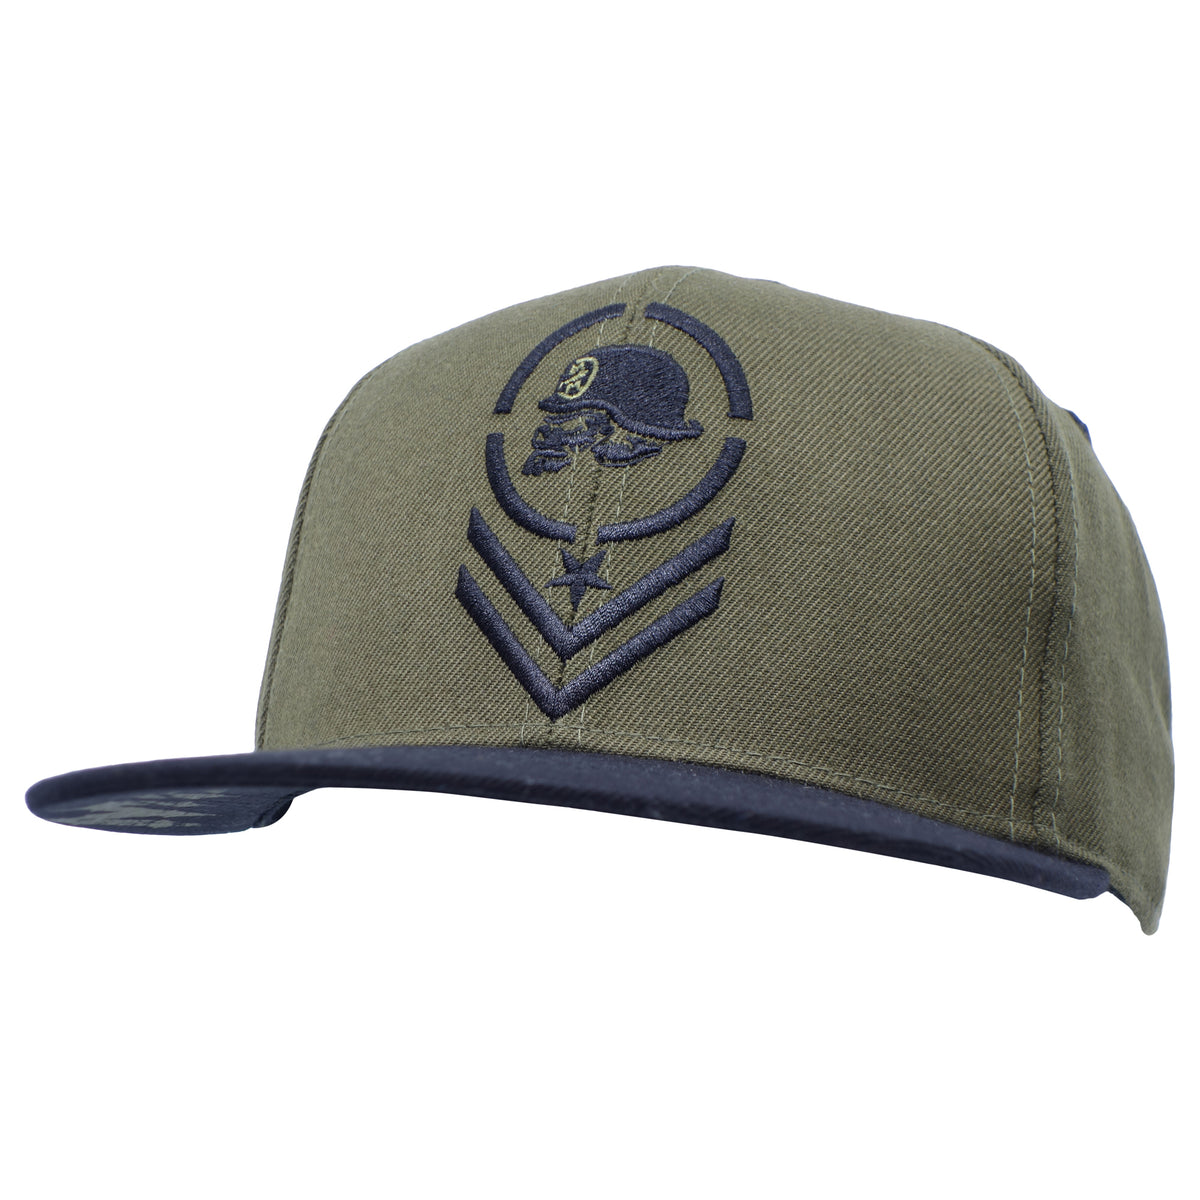 FRONT LINES SNAPBACK HAT